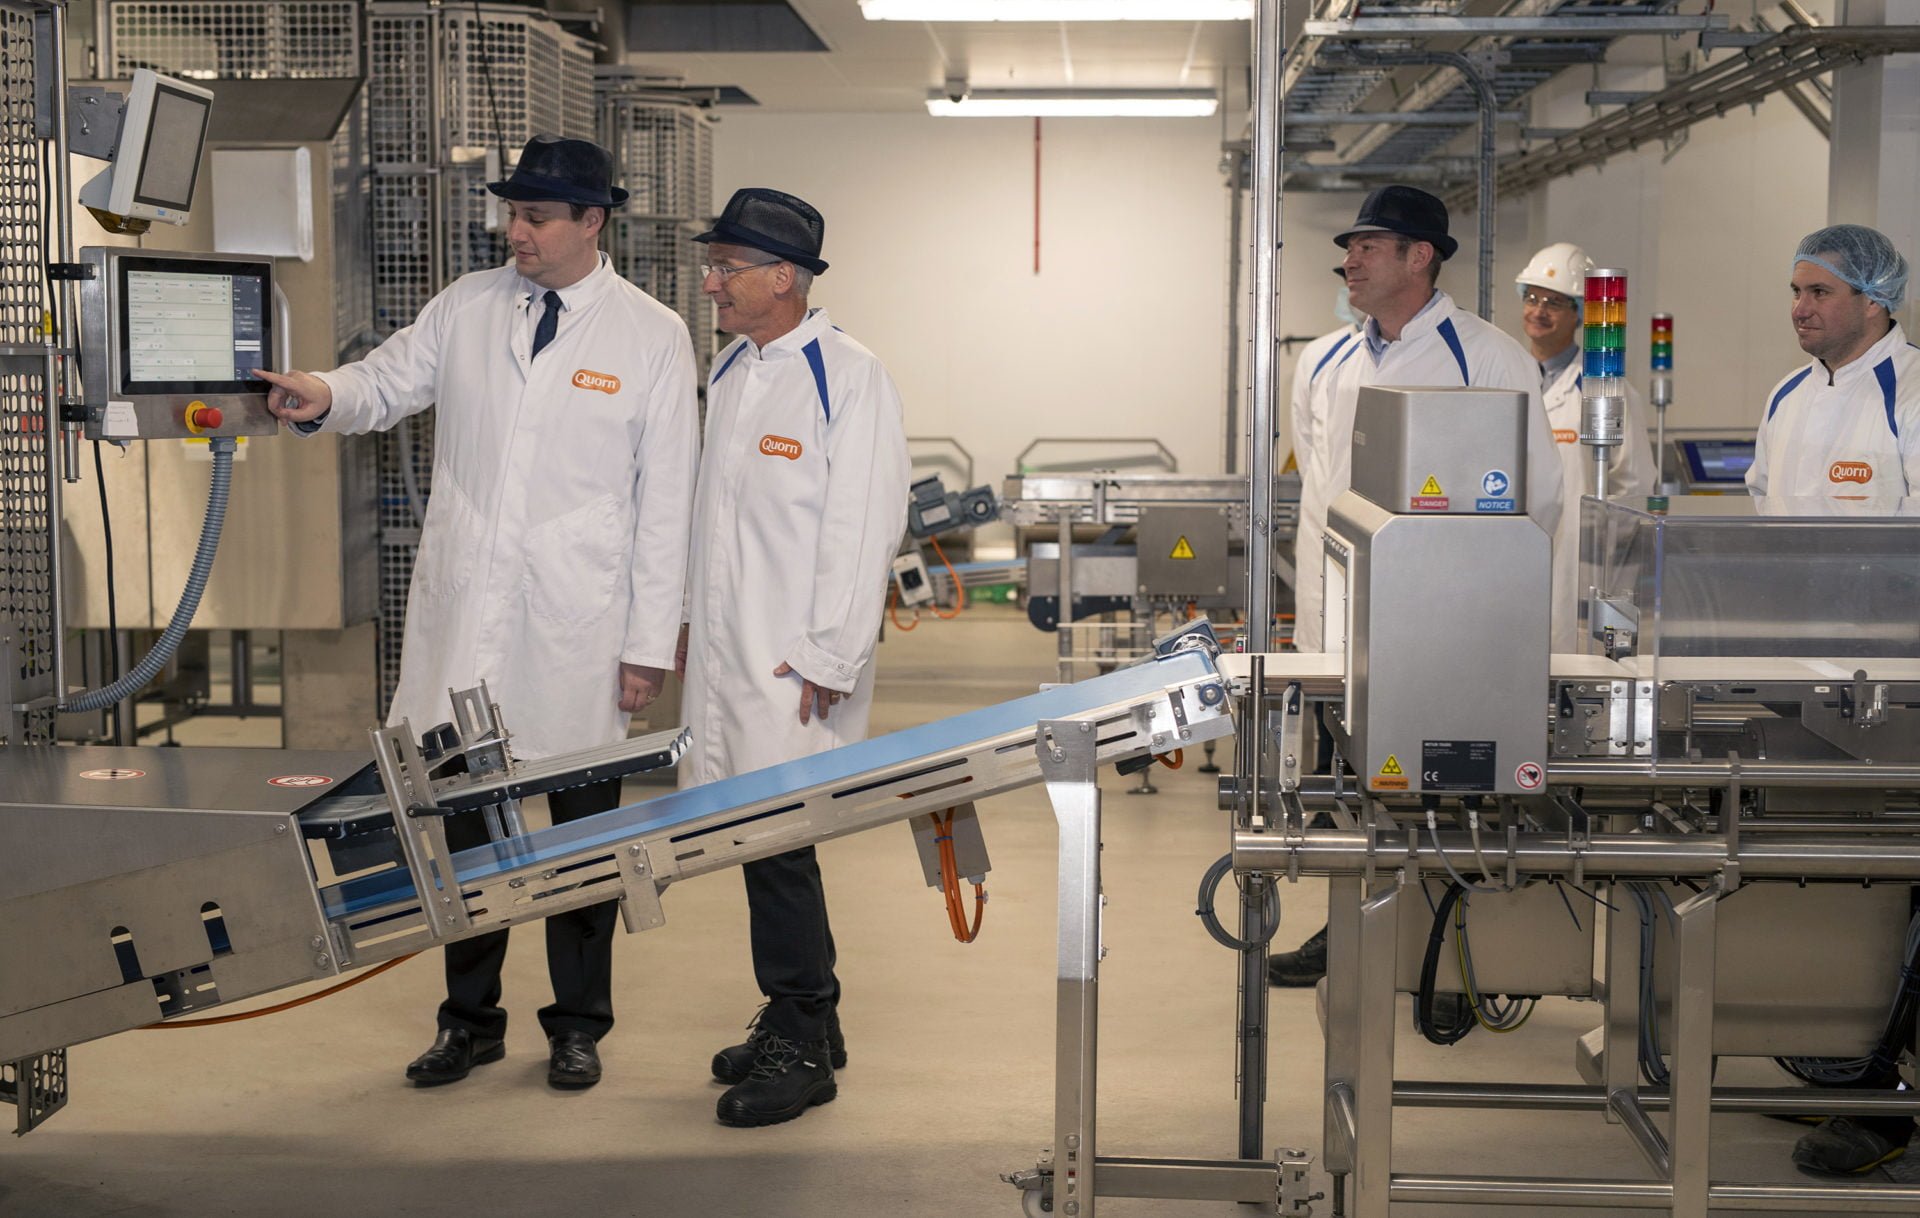 New Quorn Facility | Tees Valley Combined Authority